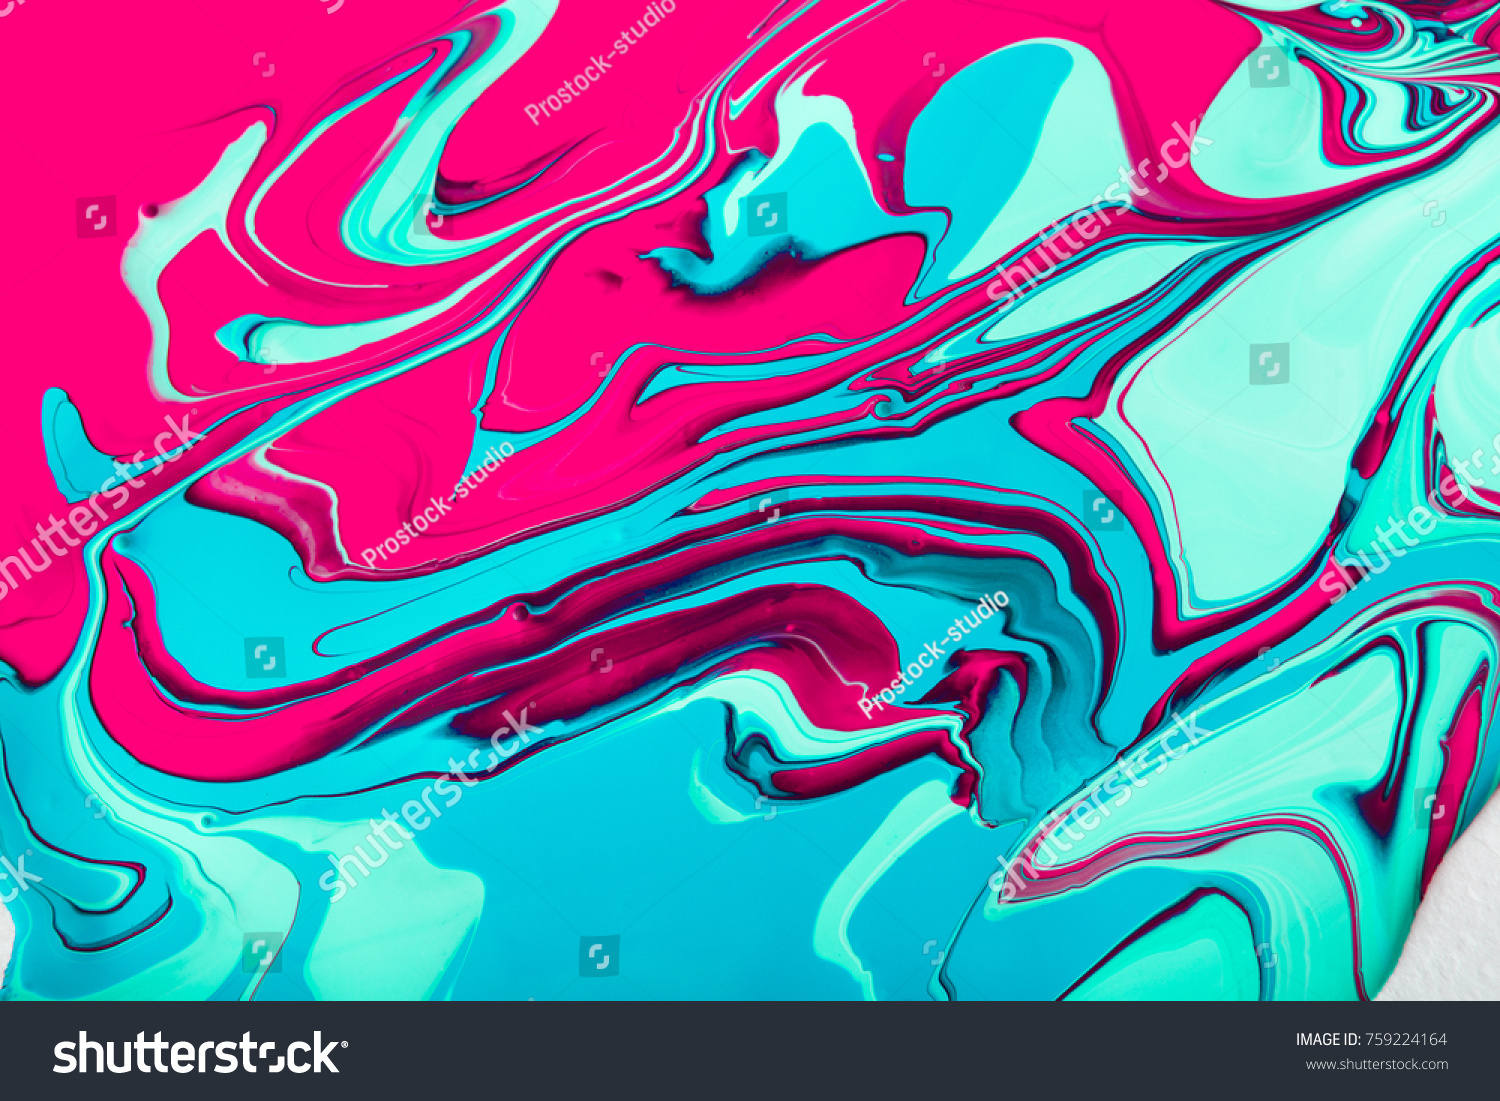 Liquid paper marbling paint background. Fluid painting abstract texture, art technique. Colorful mix of acrylic vibrant colors. #759224164